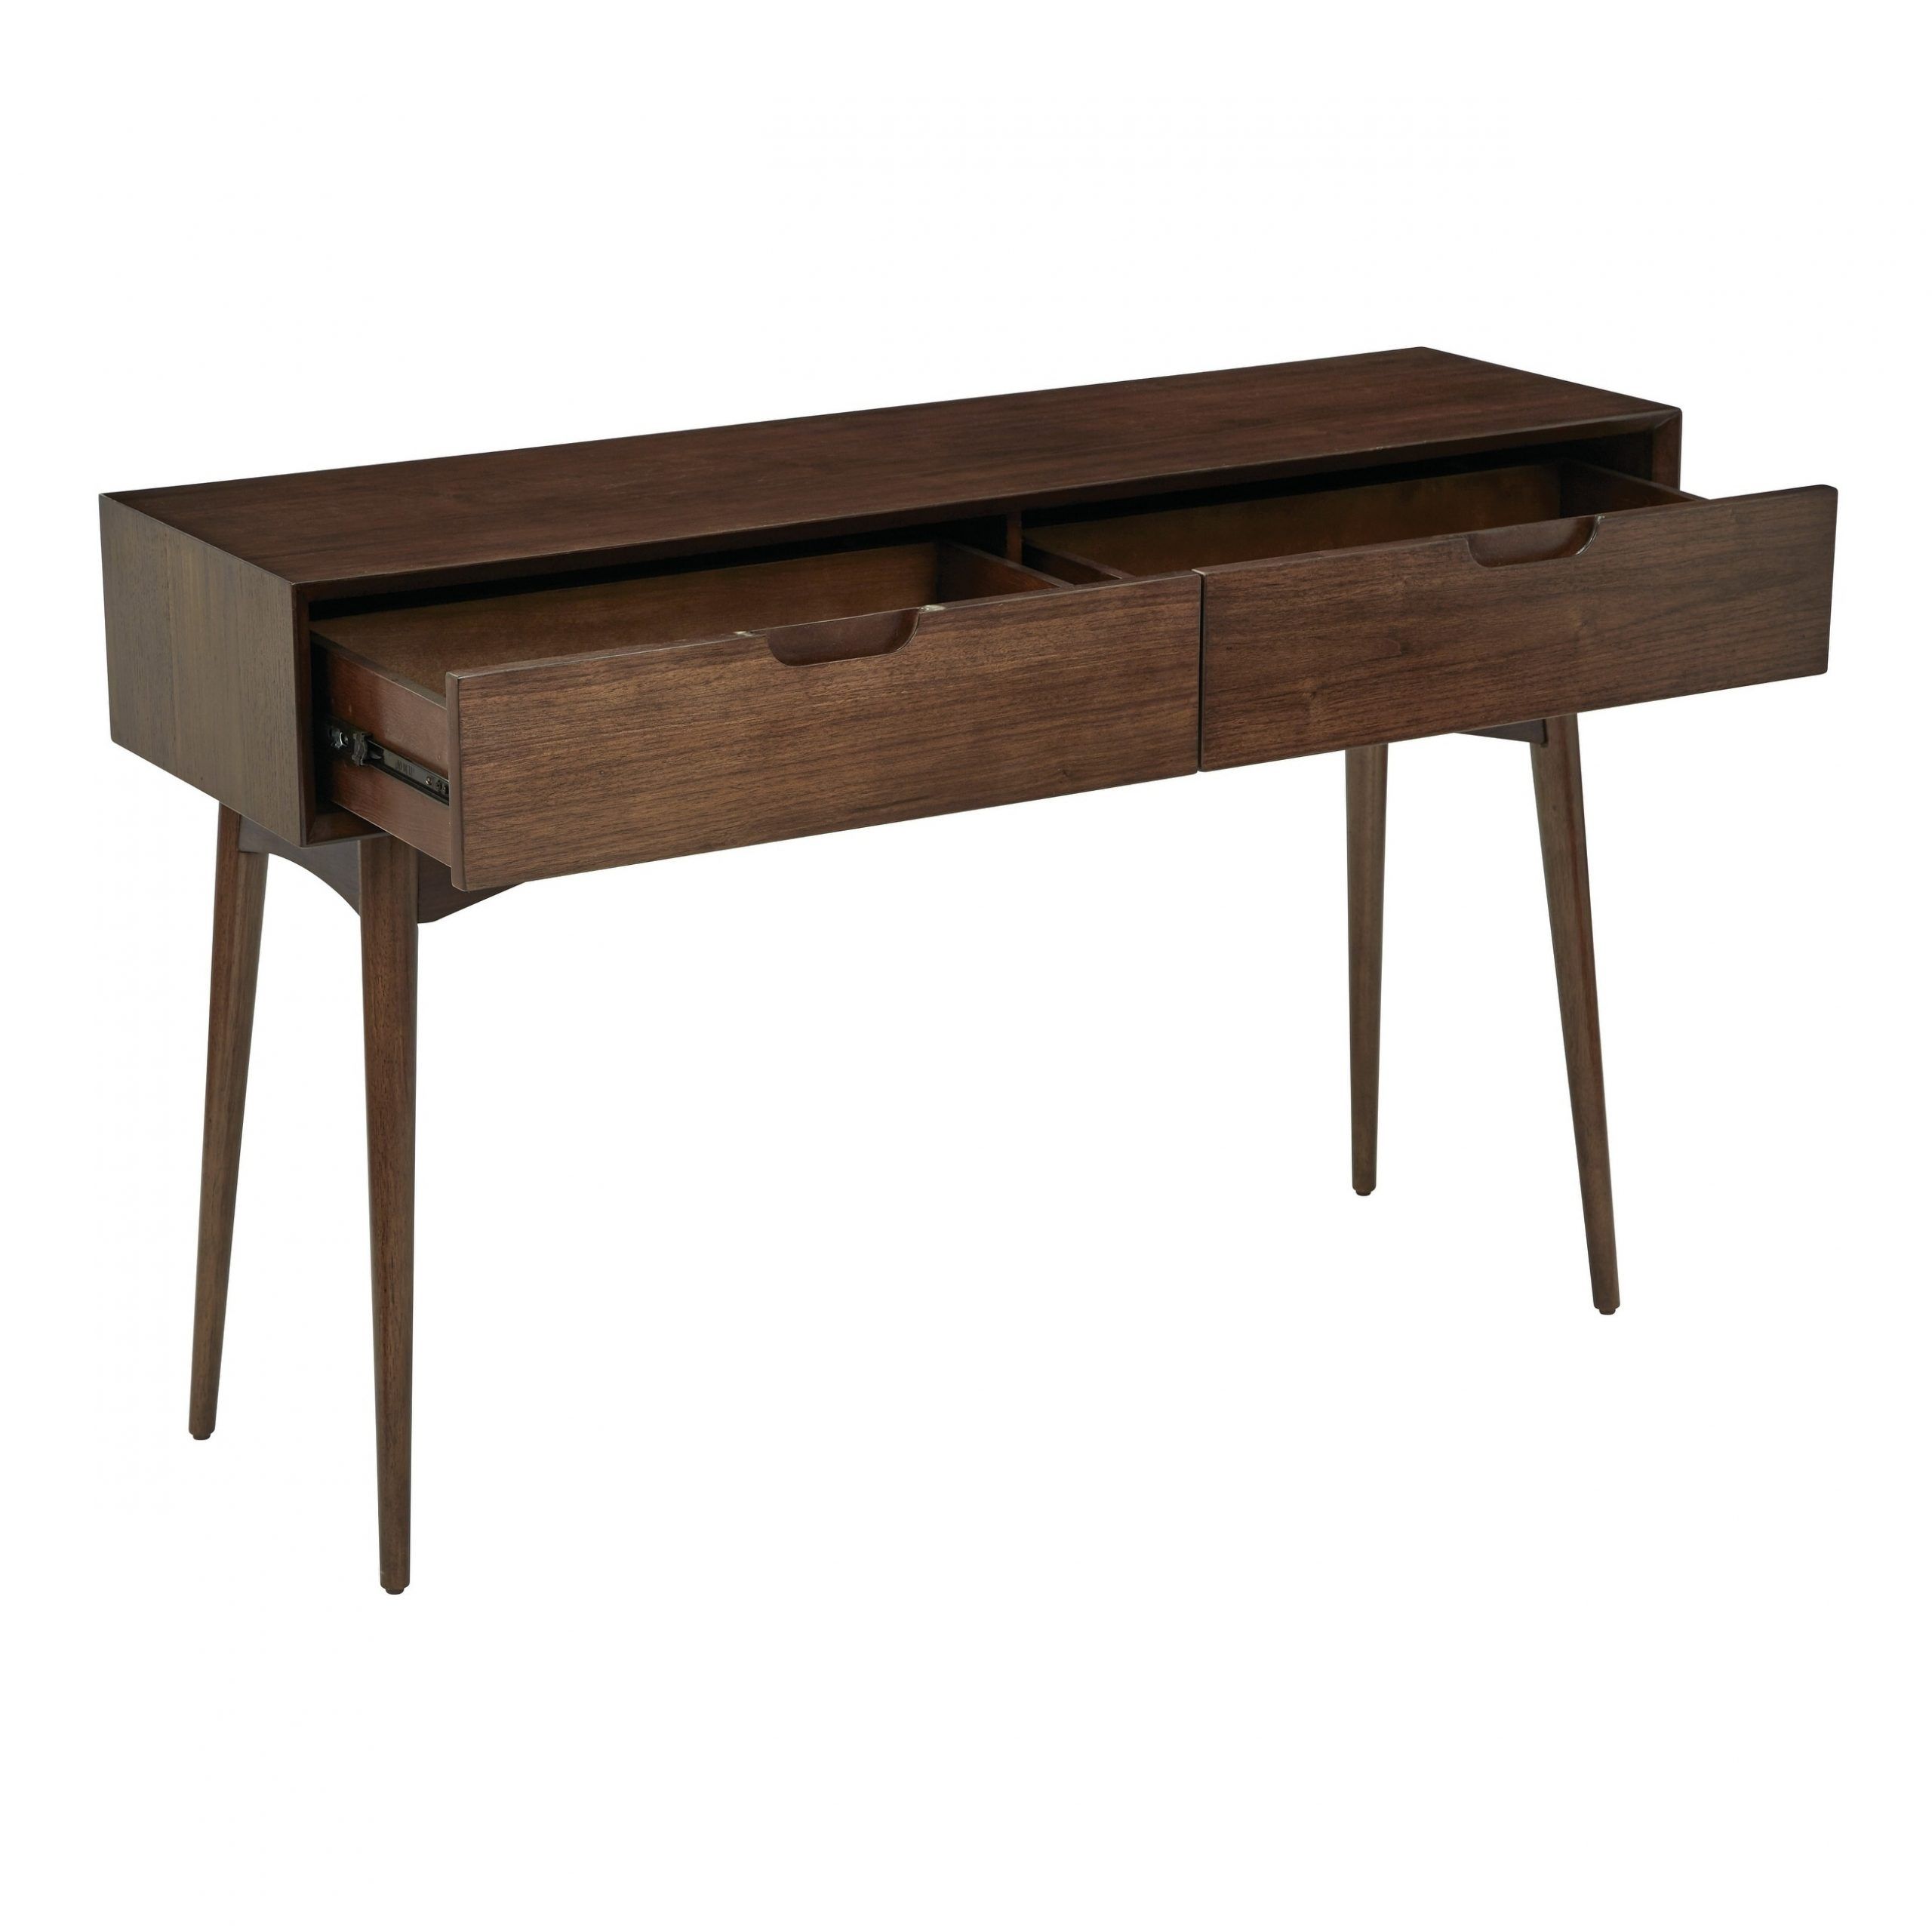 Mid Century Copenhagen Console Table In Walnut Finish Walnut Mid With Hand Finished Walnut Console Tables (View 12 of 20)